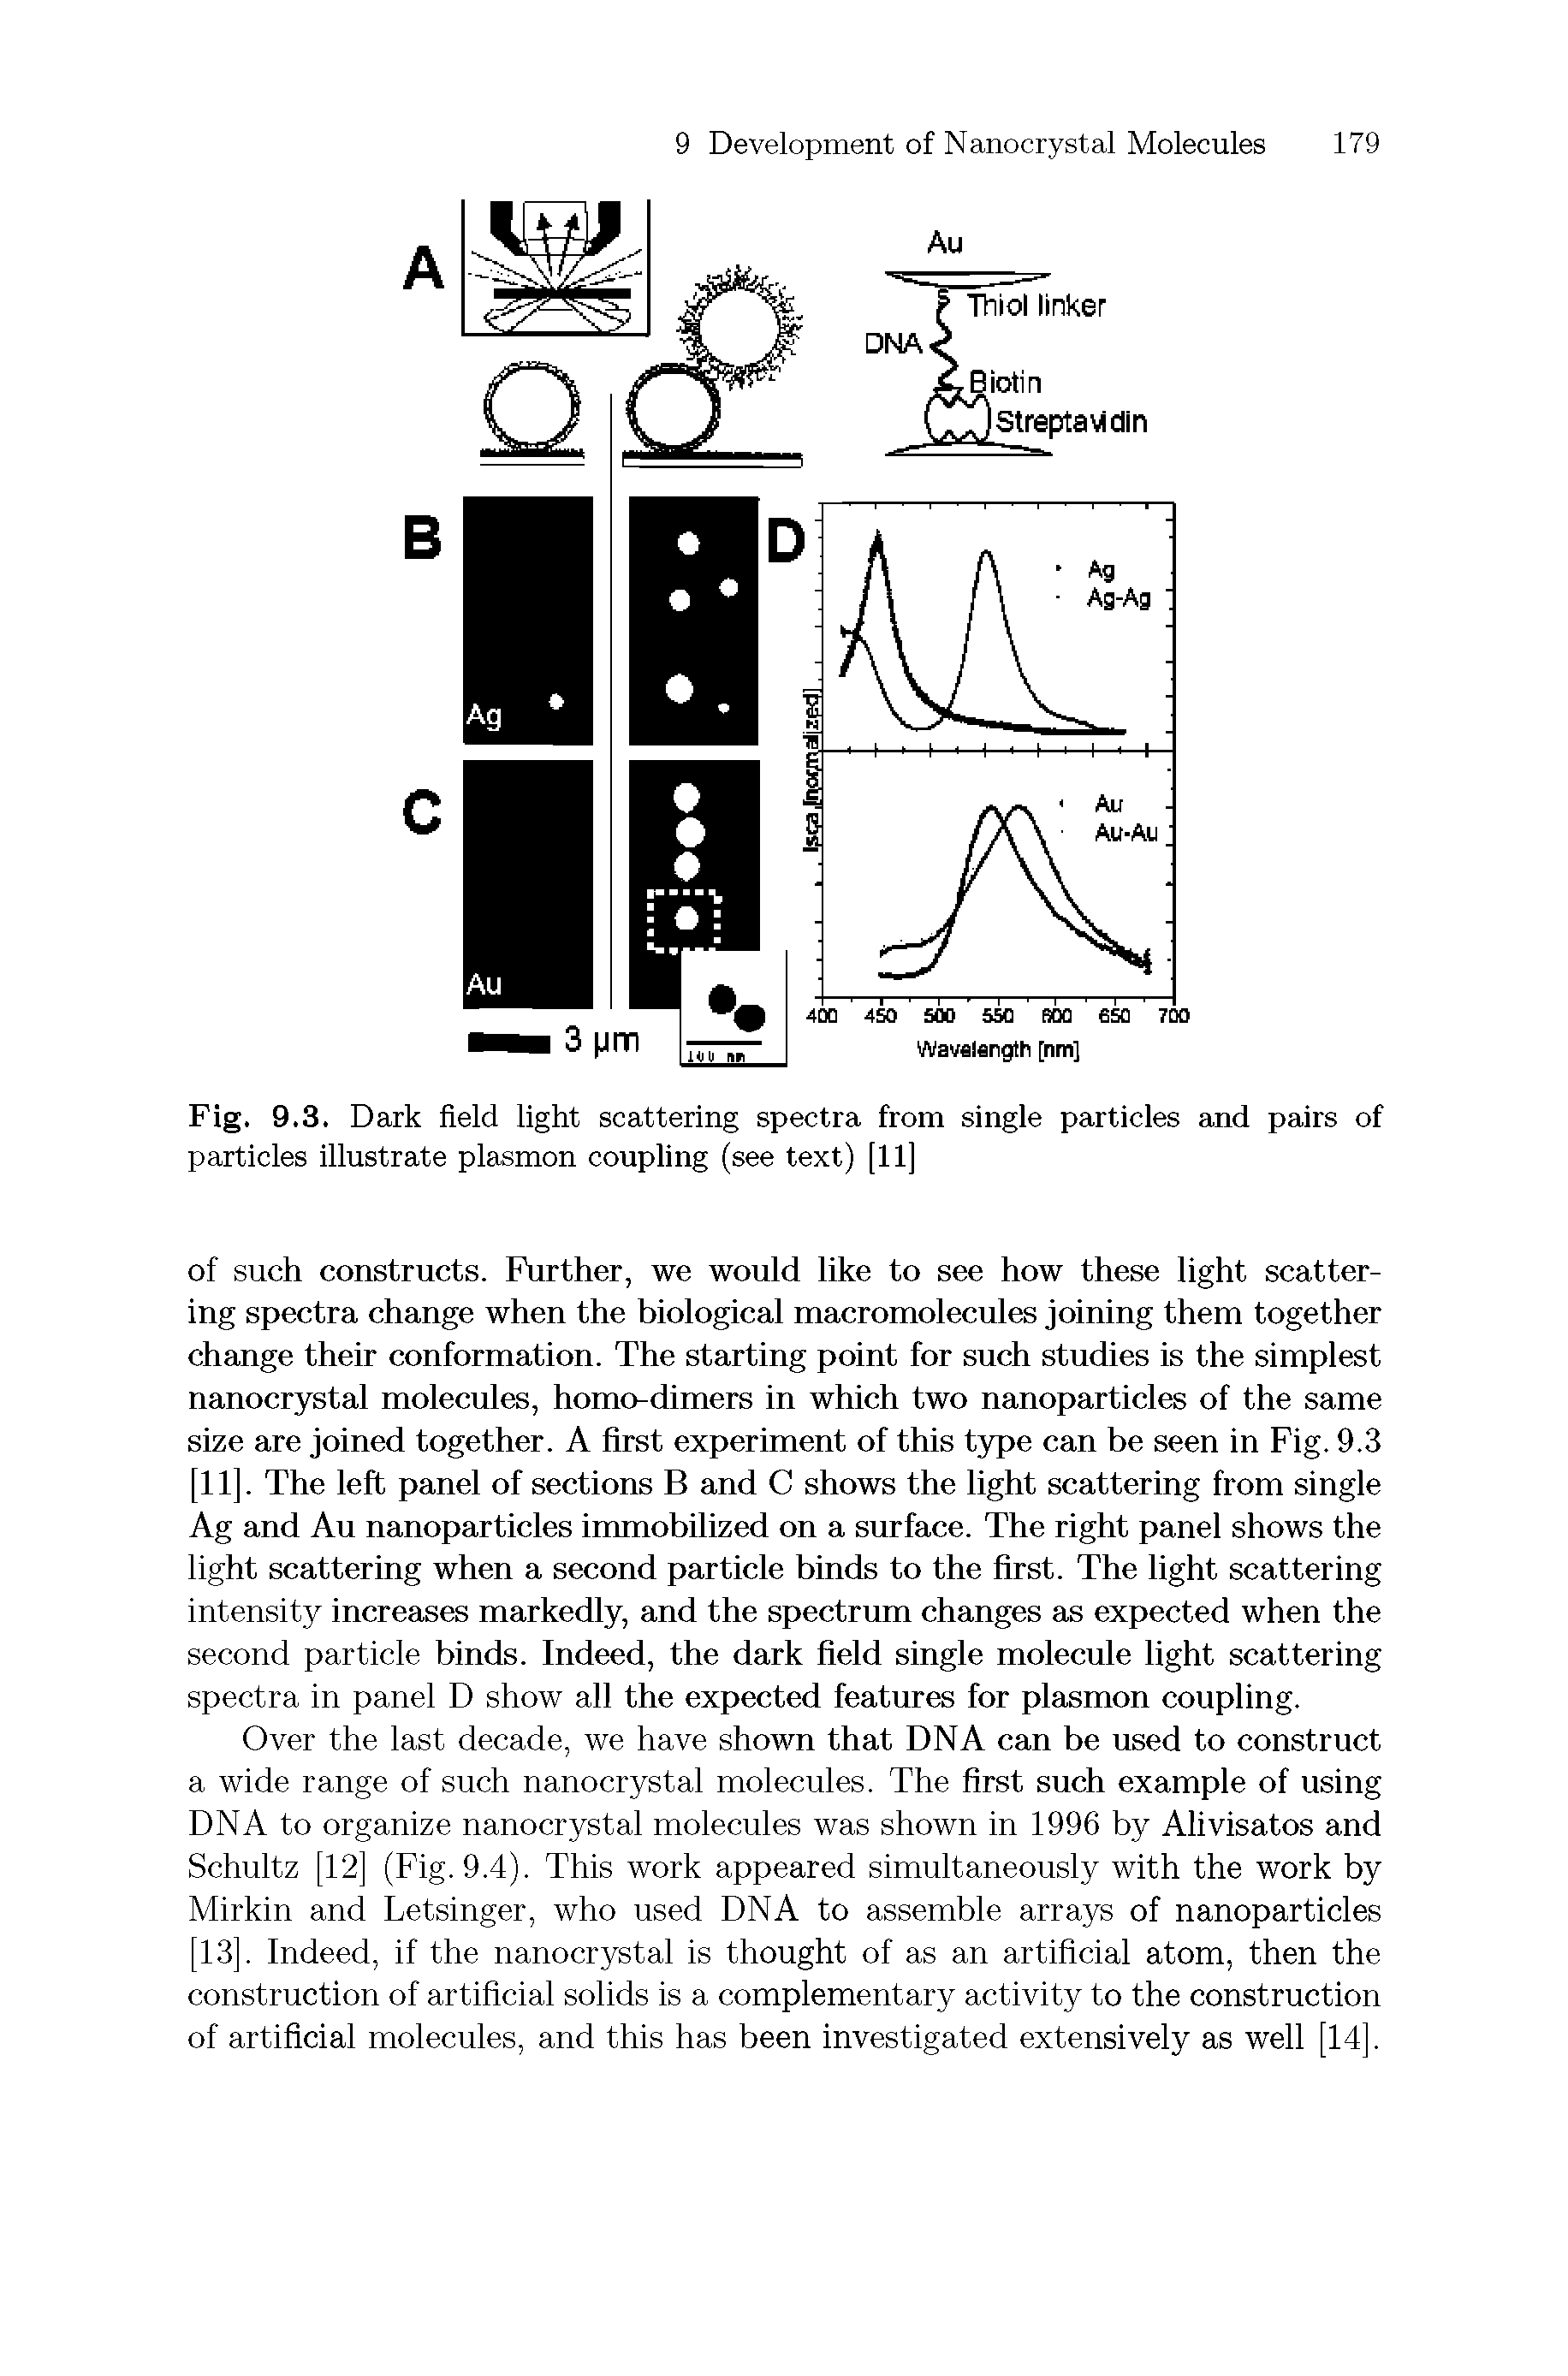 Fig. 9.3. Dark field light scattering spectra from single particles and pairs of particles illustrate plasmon coupling (see text) [11]...